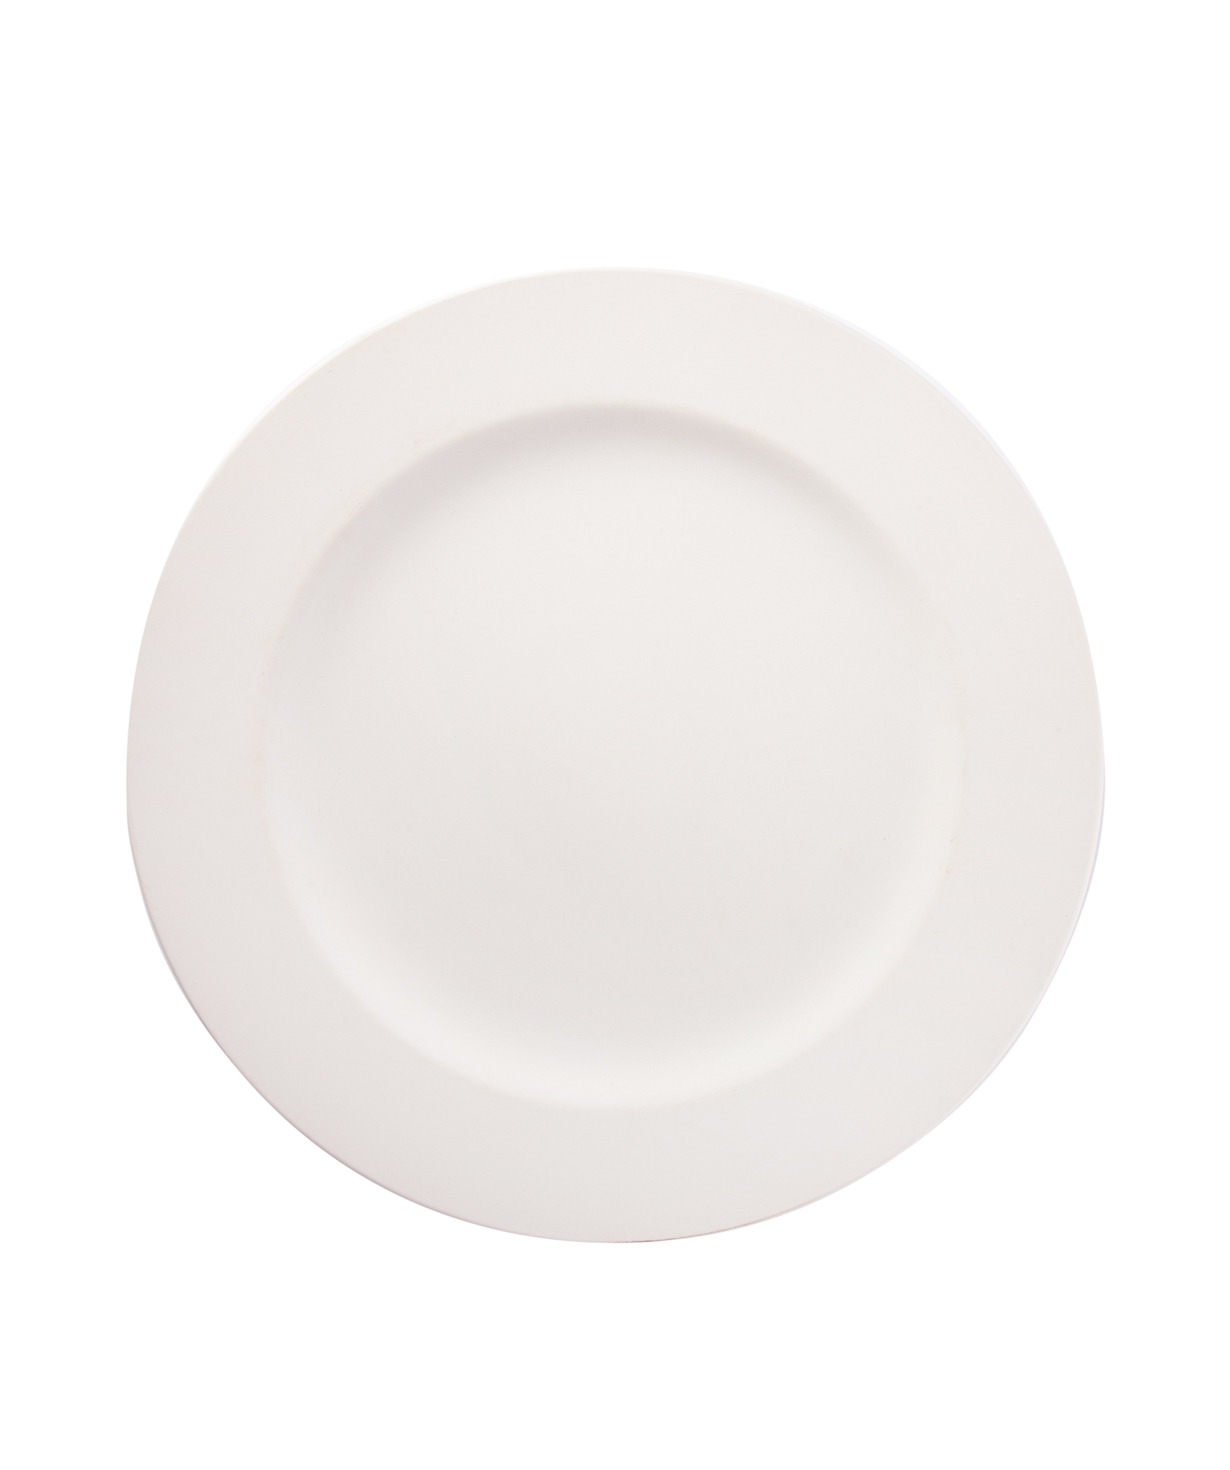 Collection `Yes Republic` art, dinner plate